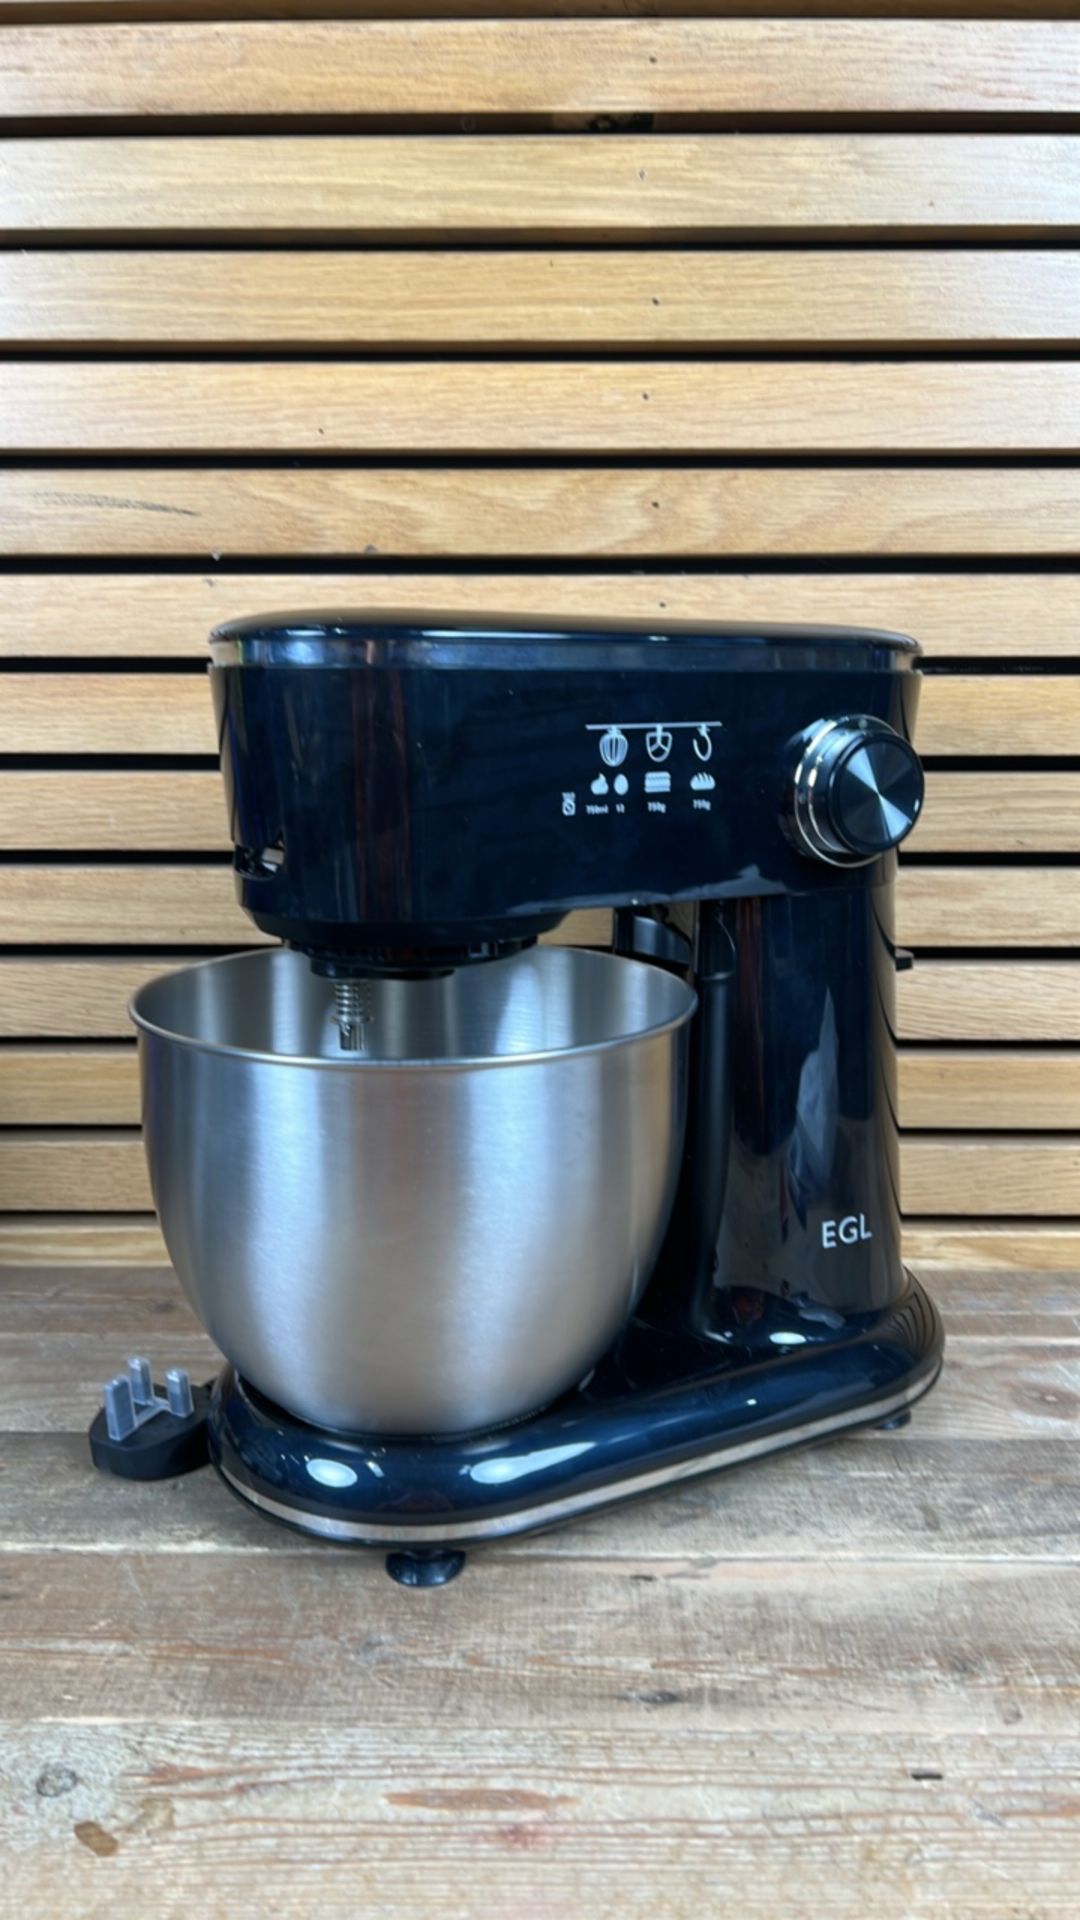 EGL 5 Litre Stand Mixer - Image 3 of 7